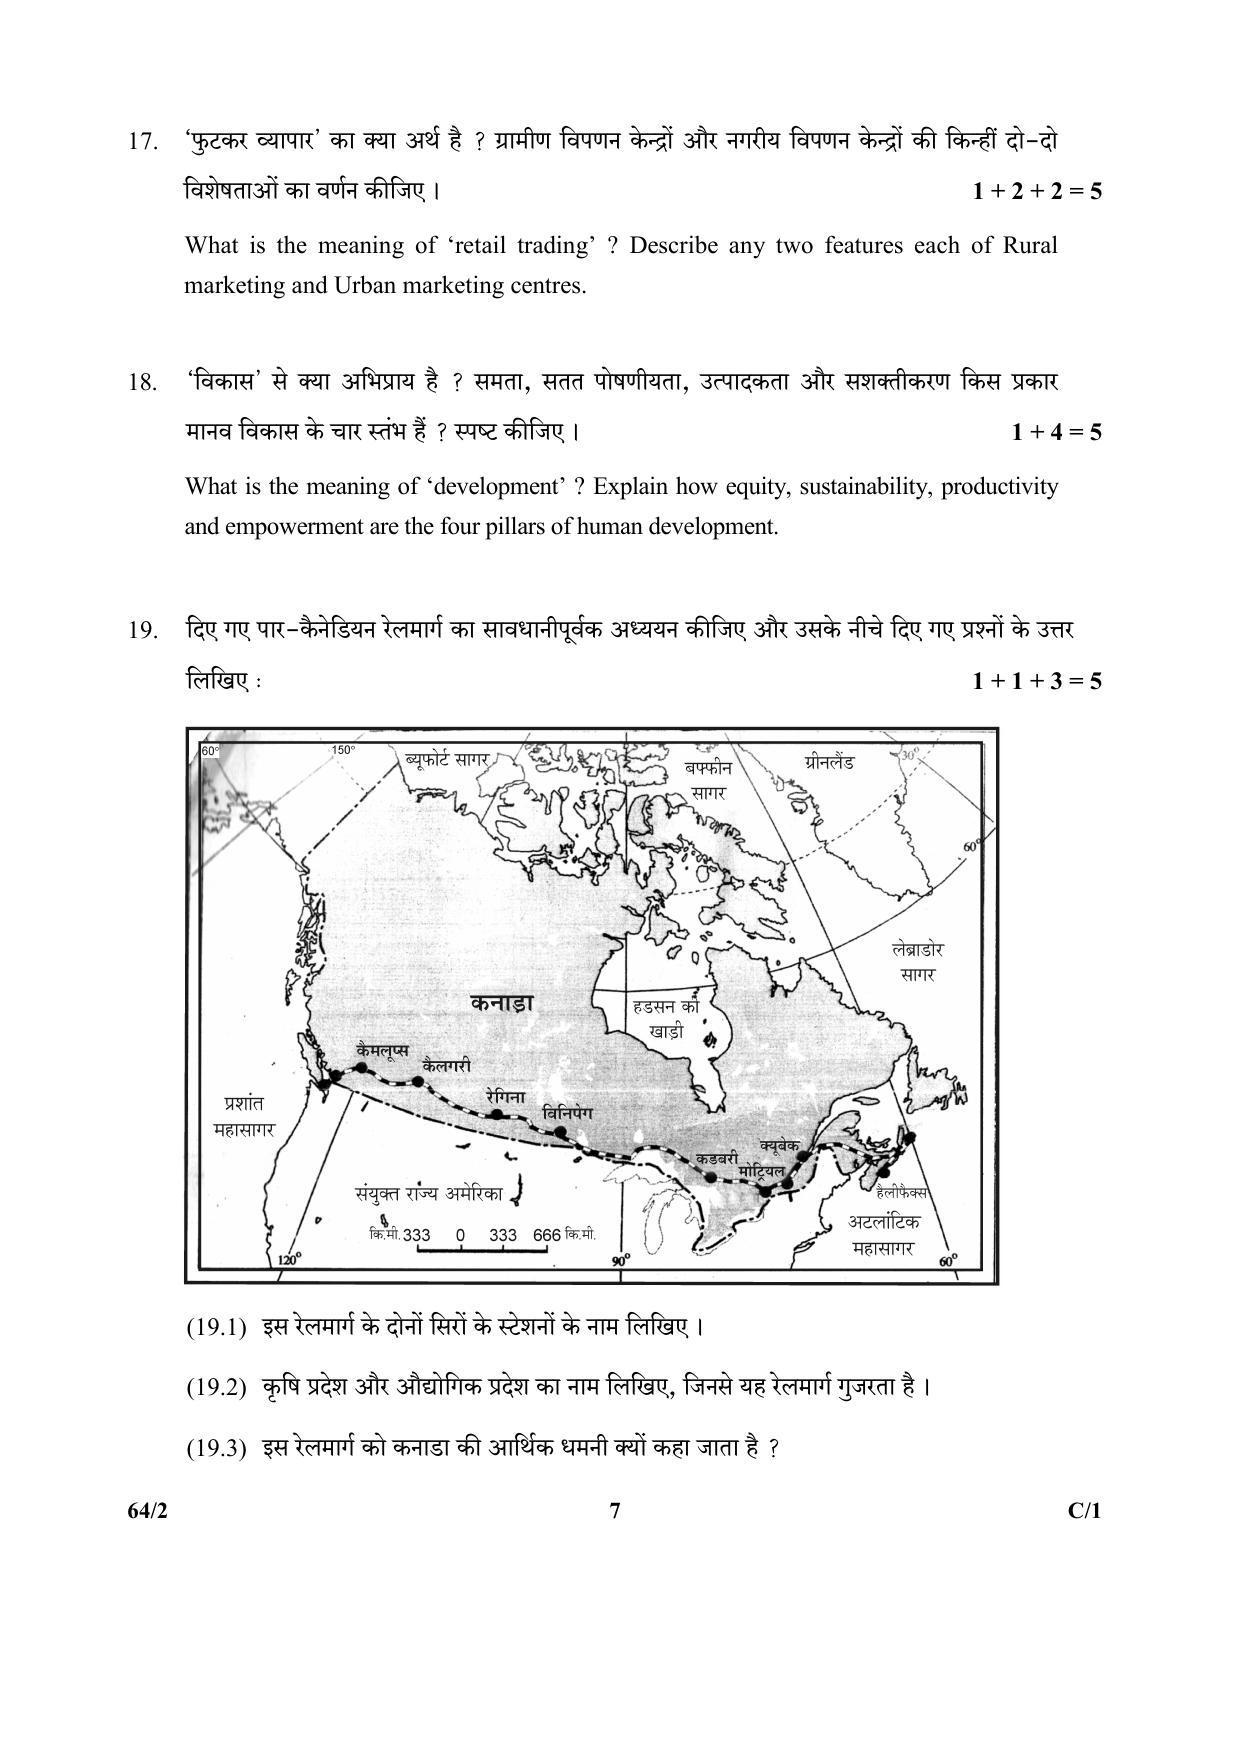 CBSE Class 12 64-2 (Geography) 2018 Compartment Question Paper - Page 7